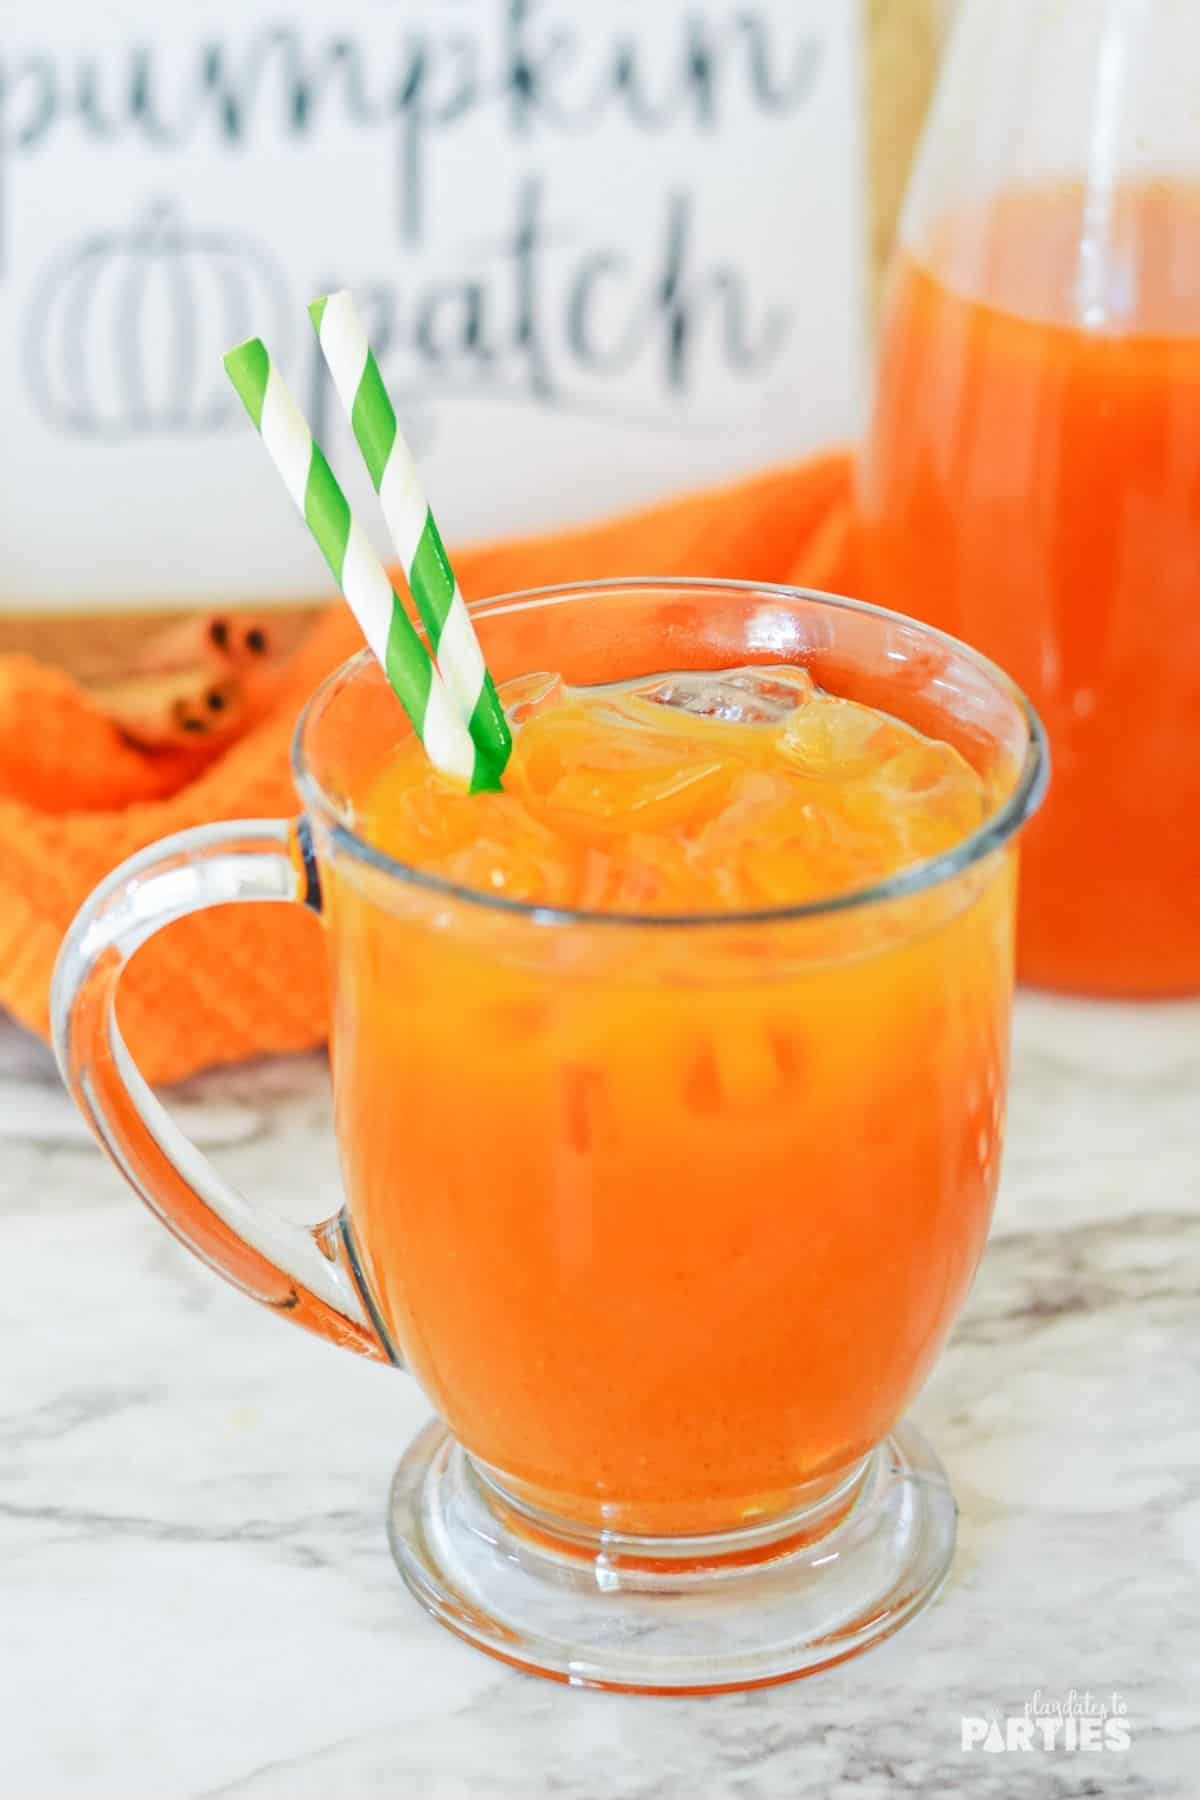 A mug of pumpkin juice recipe with green paper straws with cinnamon sticks, a pumpkin patch sign, and a pitcher of juice in the background.